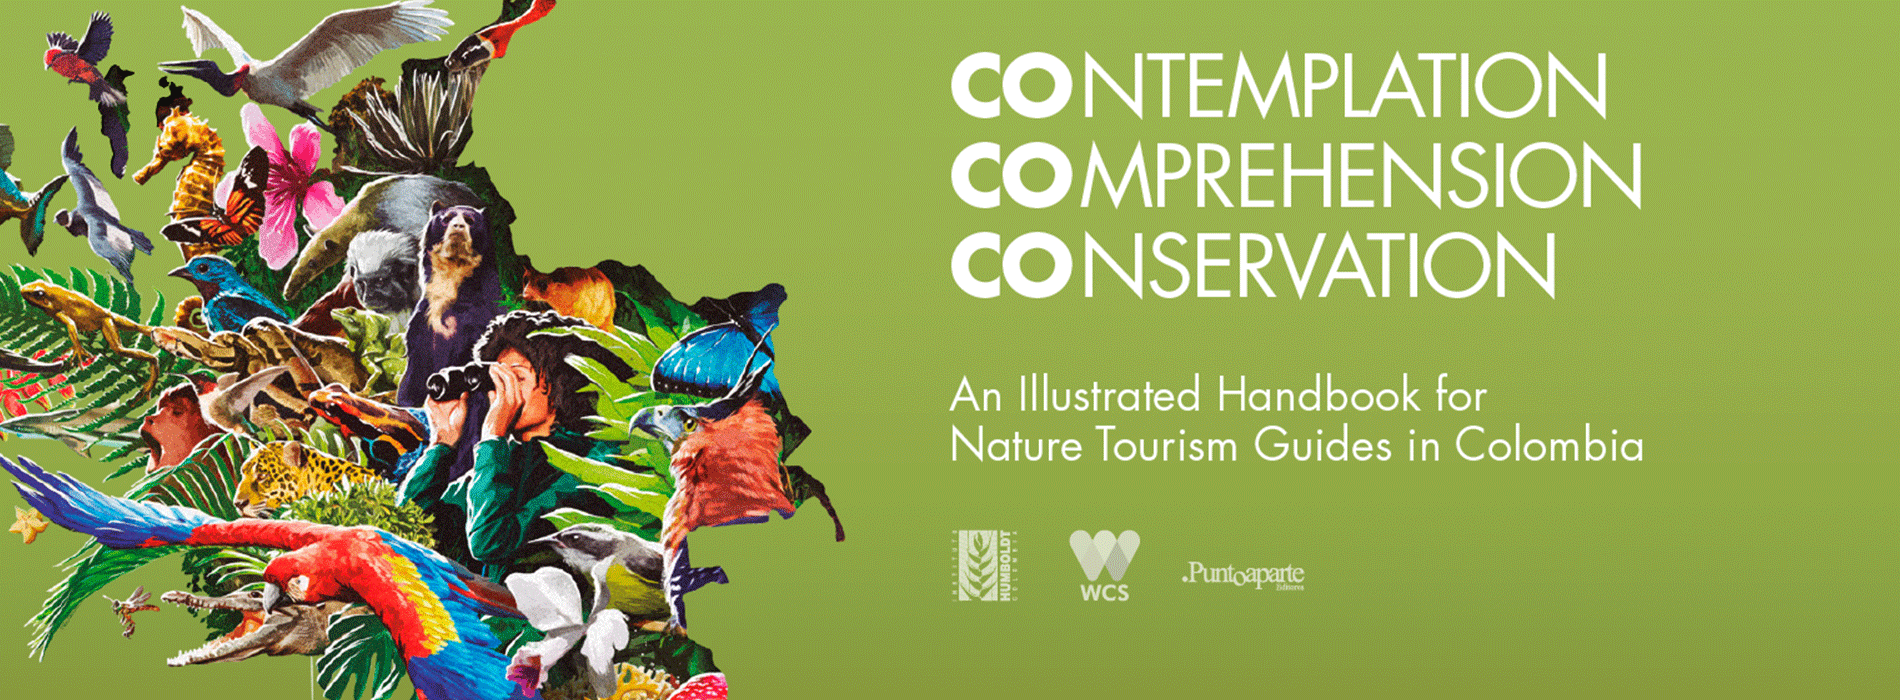 ProColombia Launches an Illustrative Handbook for Nature Tourism Guides to Inspire Eco-Conscious Travelers